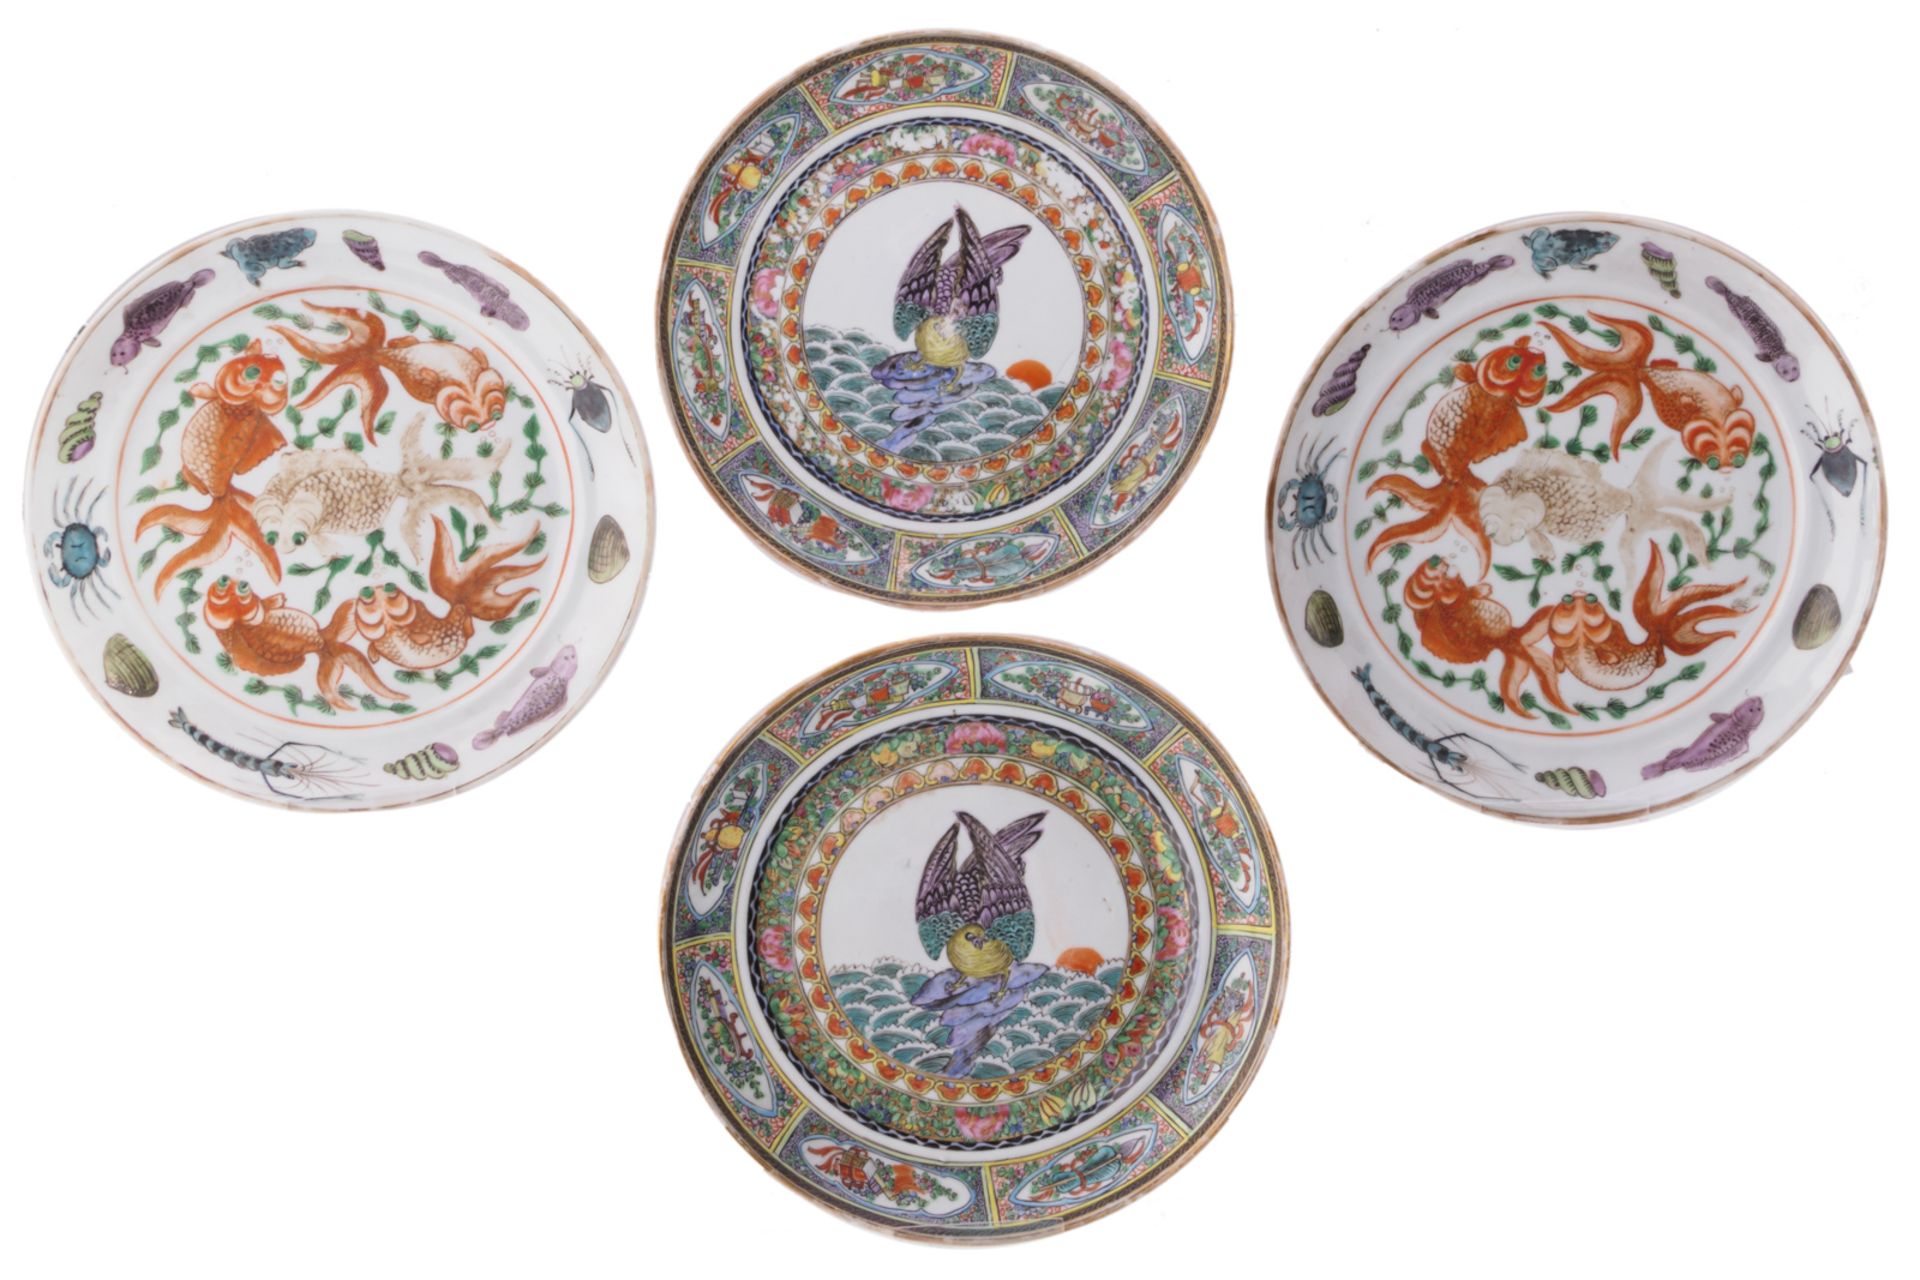 Two pairs of Chinese polychrome decorated dishes, one pair with various fresh-water animals and